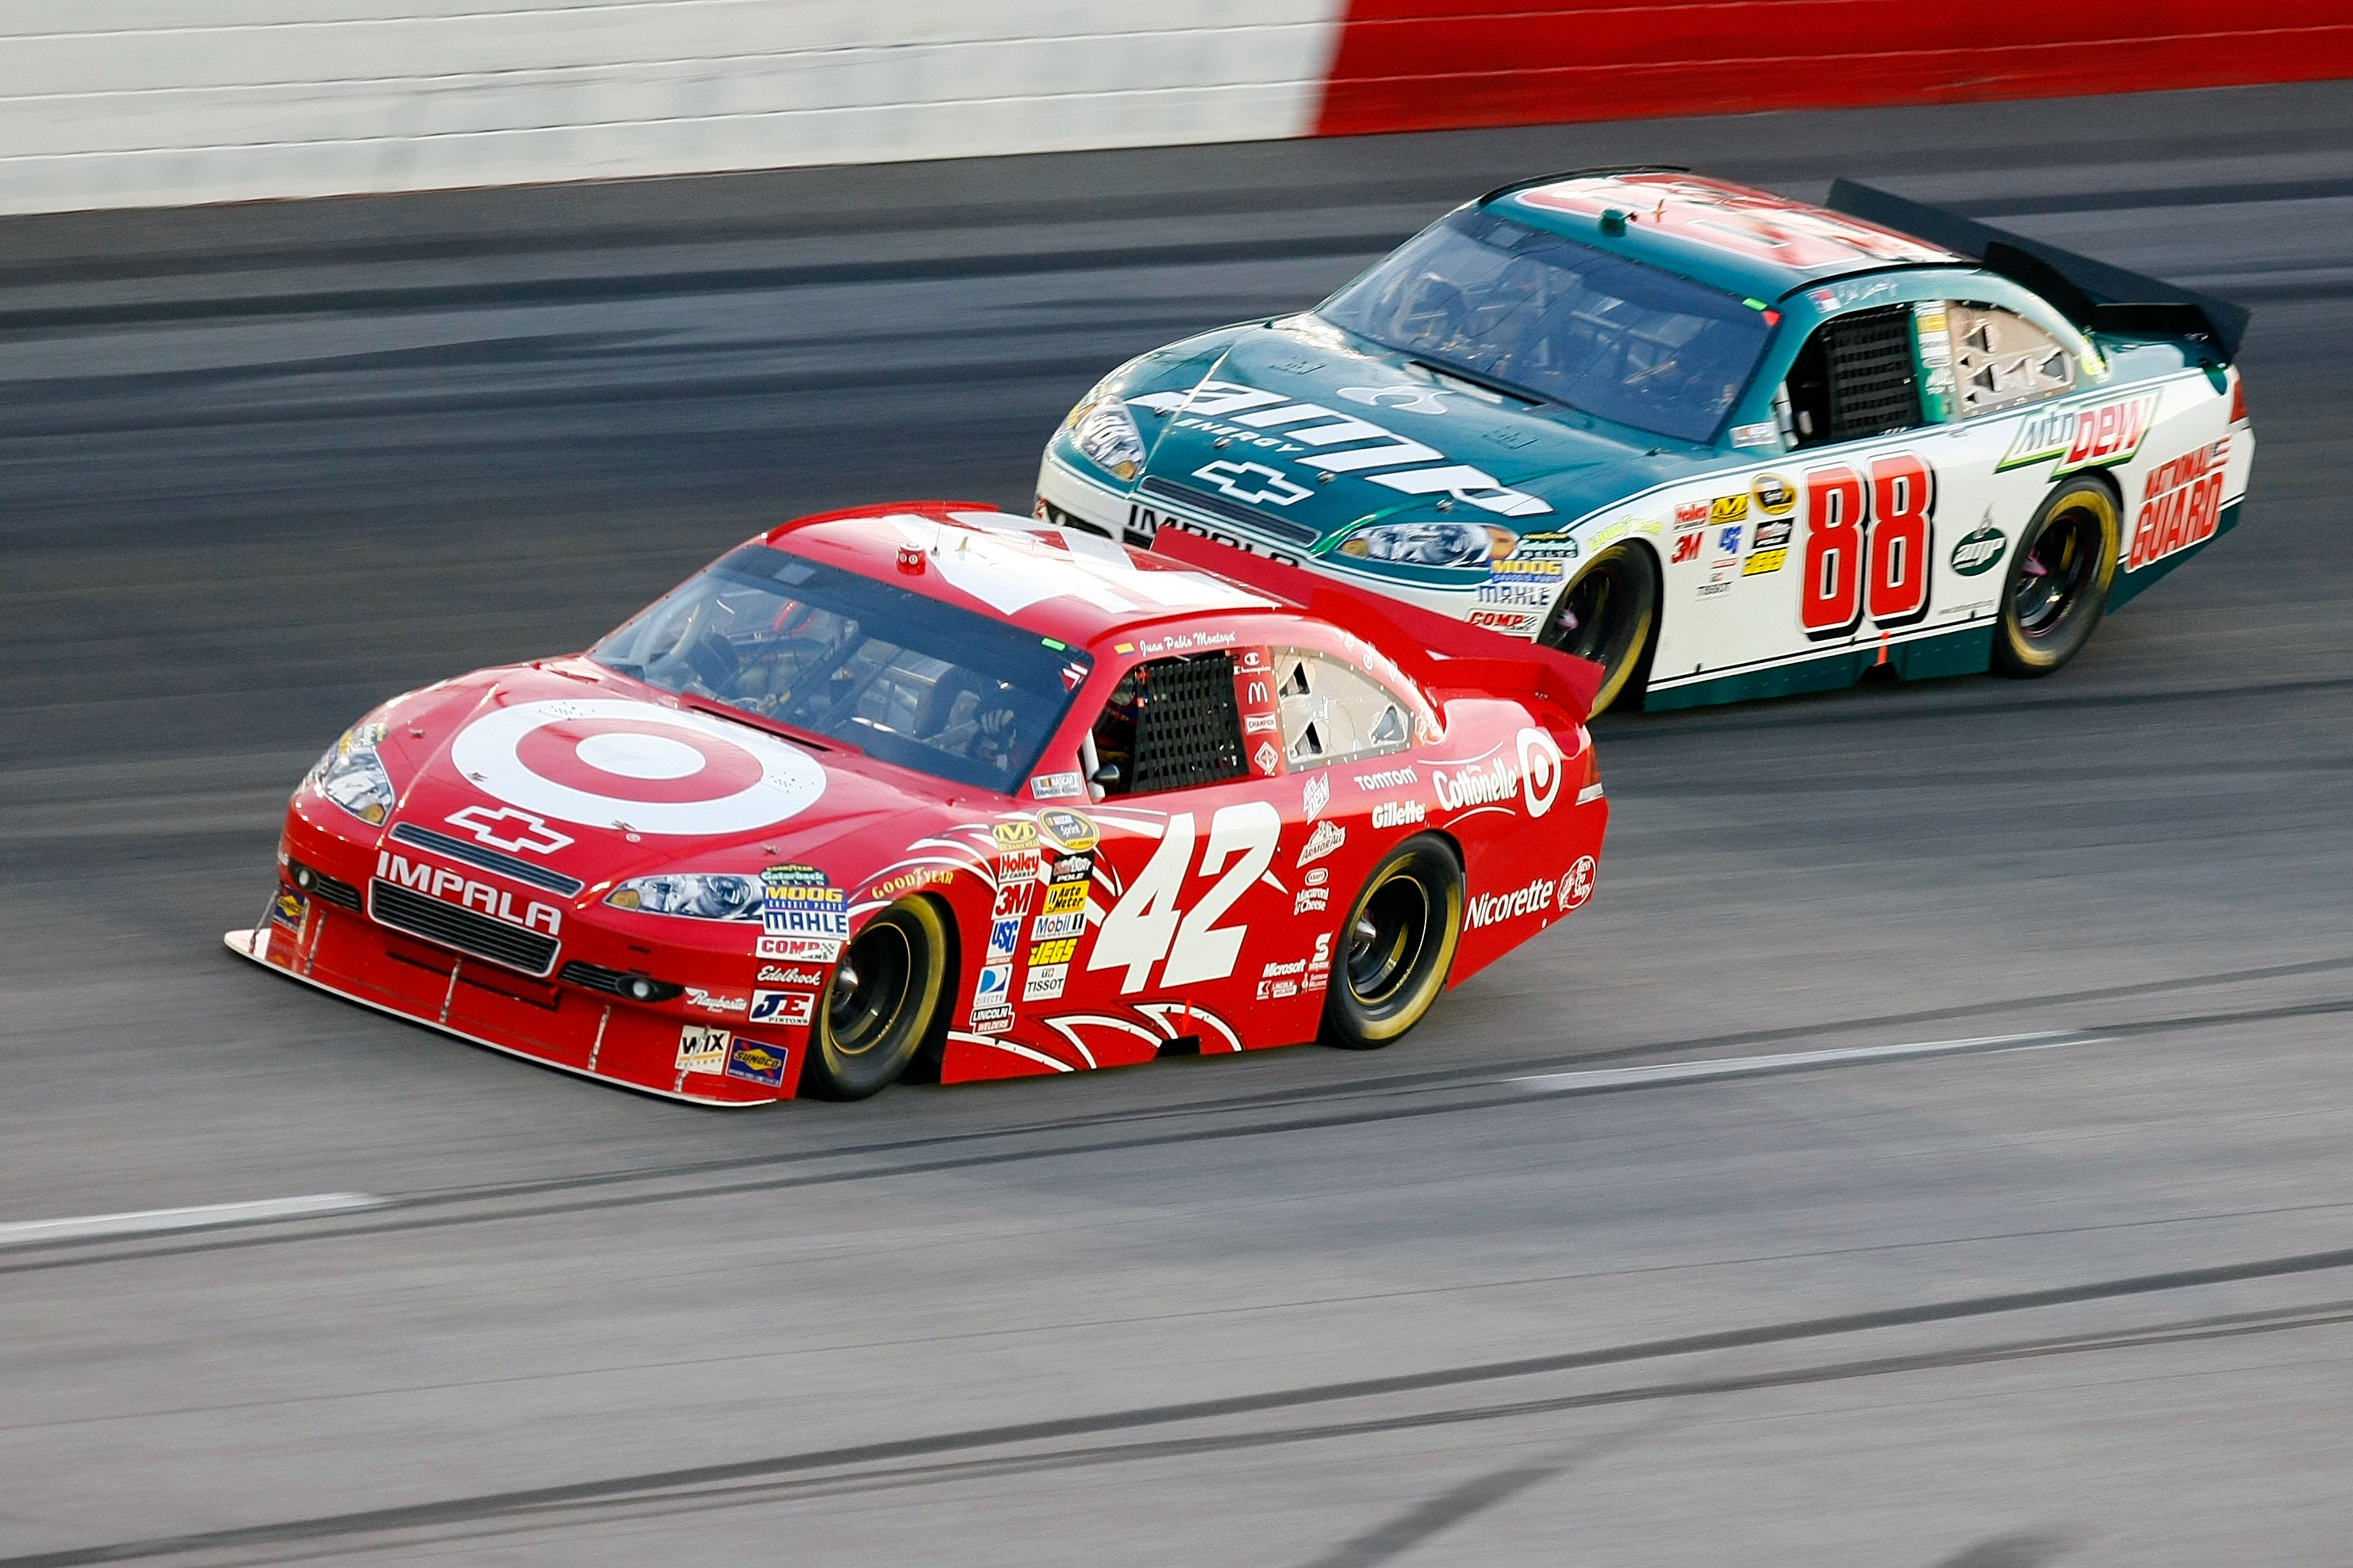 DARLINGTON, SC - MAY 08:  Juan Pablo Montoya, driver of the #42 Target Dodge leads Dale Earnhardt Jr., driver of the #88 AMP Energy / National Guard Chevrolet, during the NASCAR Sprint Cup series SHOWTIME Southern 500 at Darlington Raceway on May 8, 2010